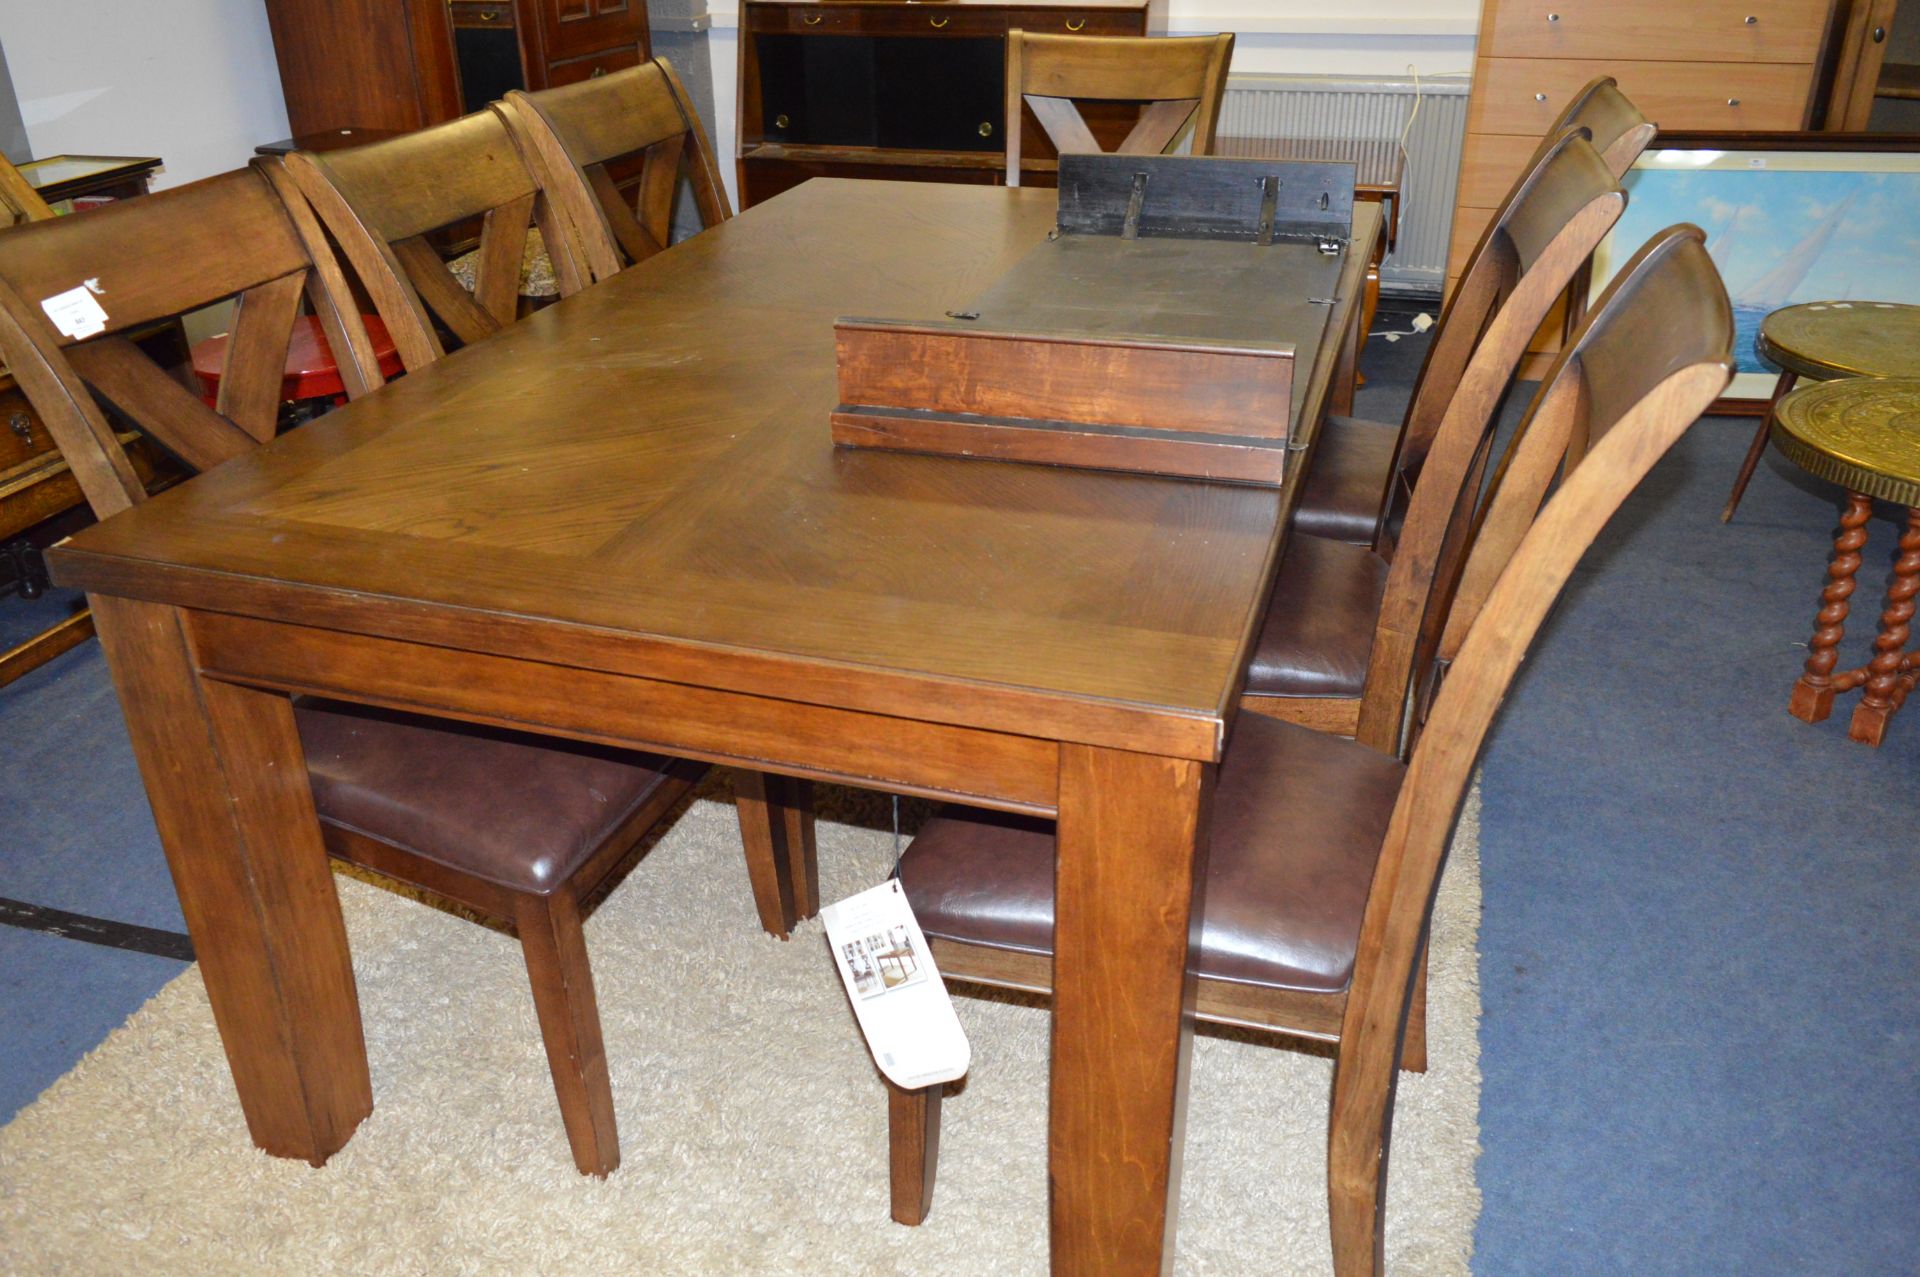 *Nine Piece Samson Dining Suite; Drawer Leaf Table and Chairs